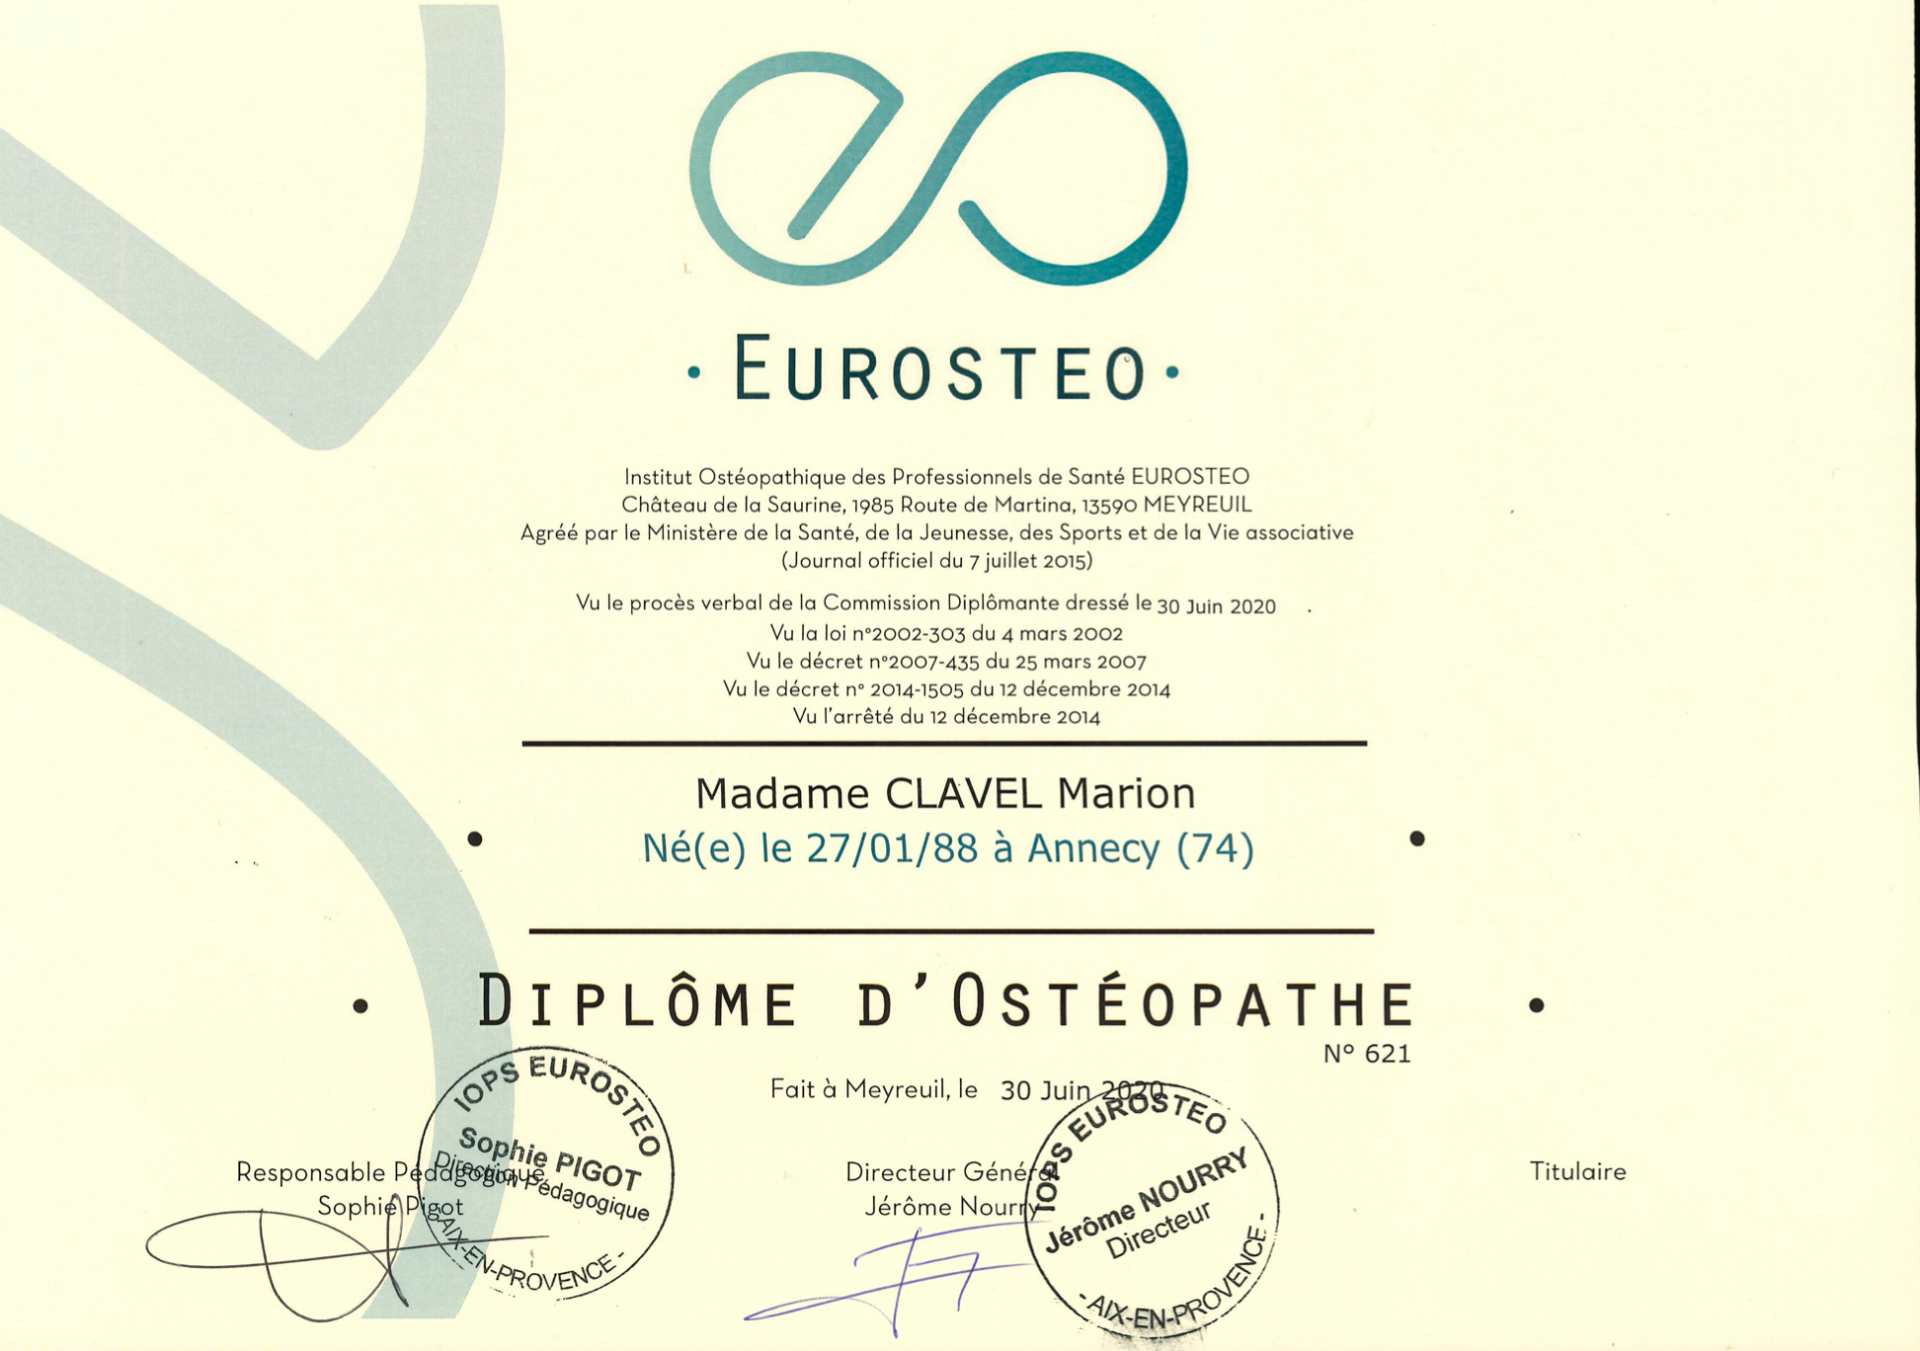 Diplome d osteopathie marion clavel